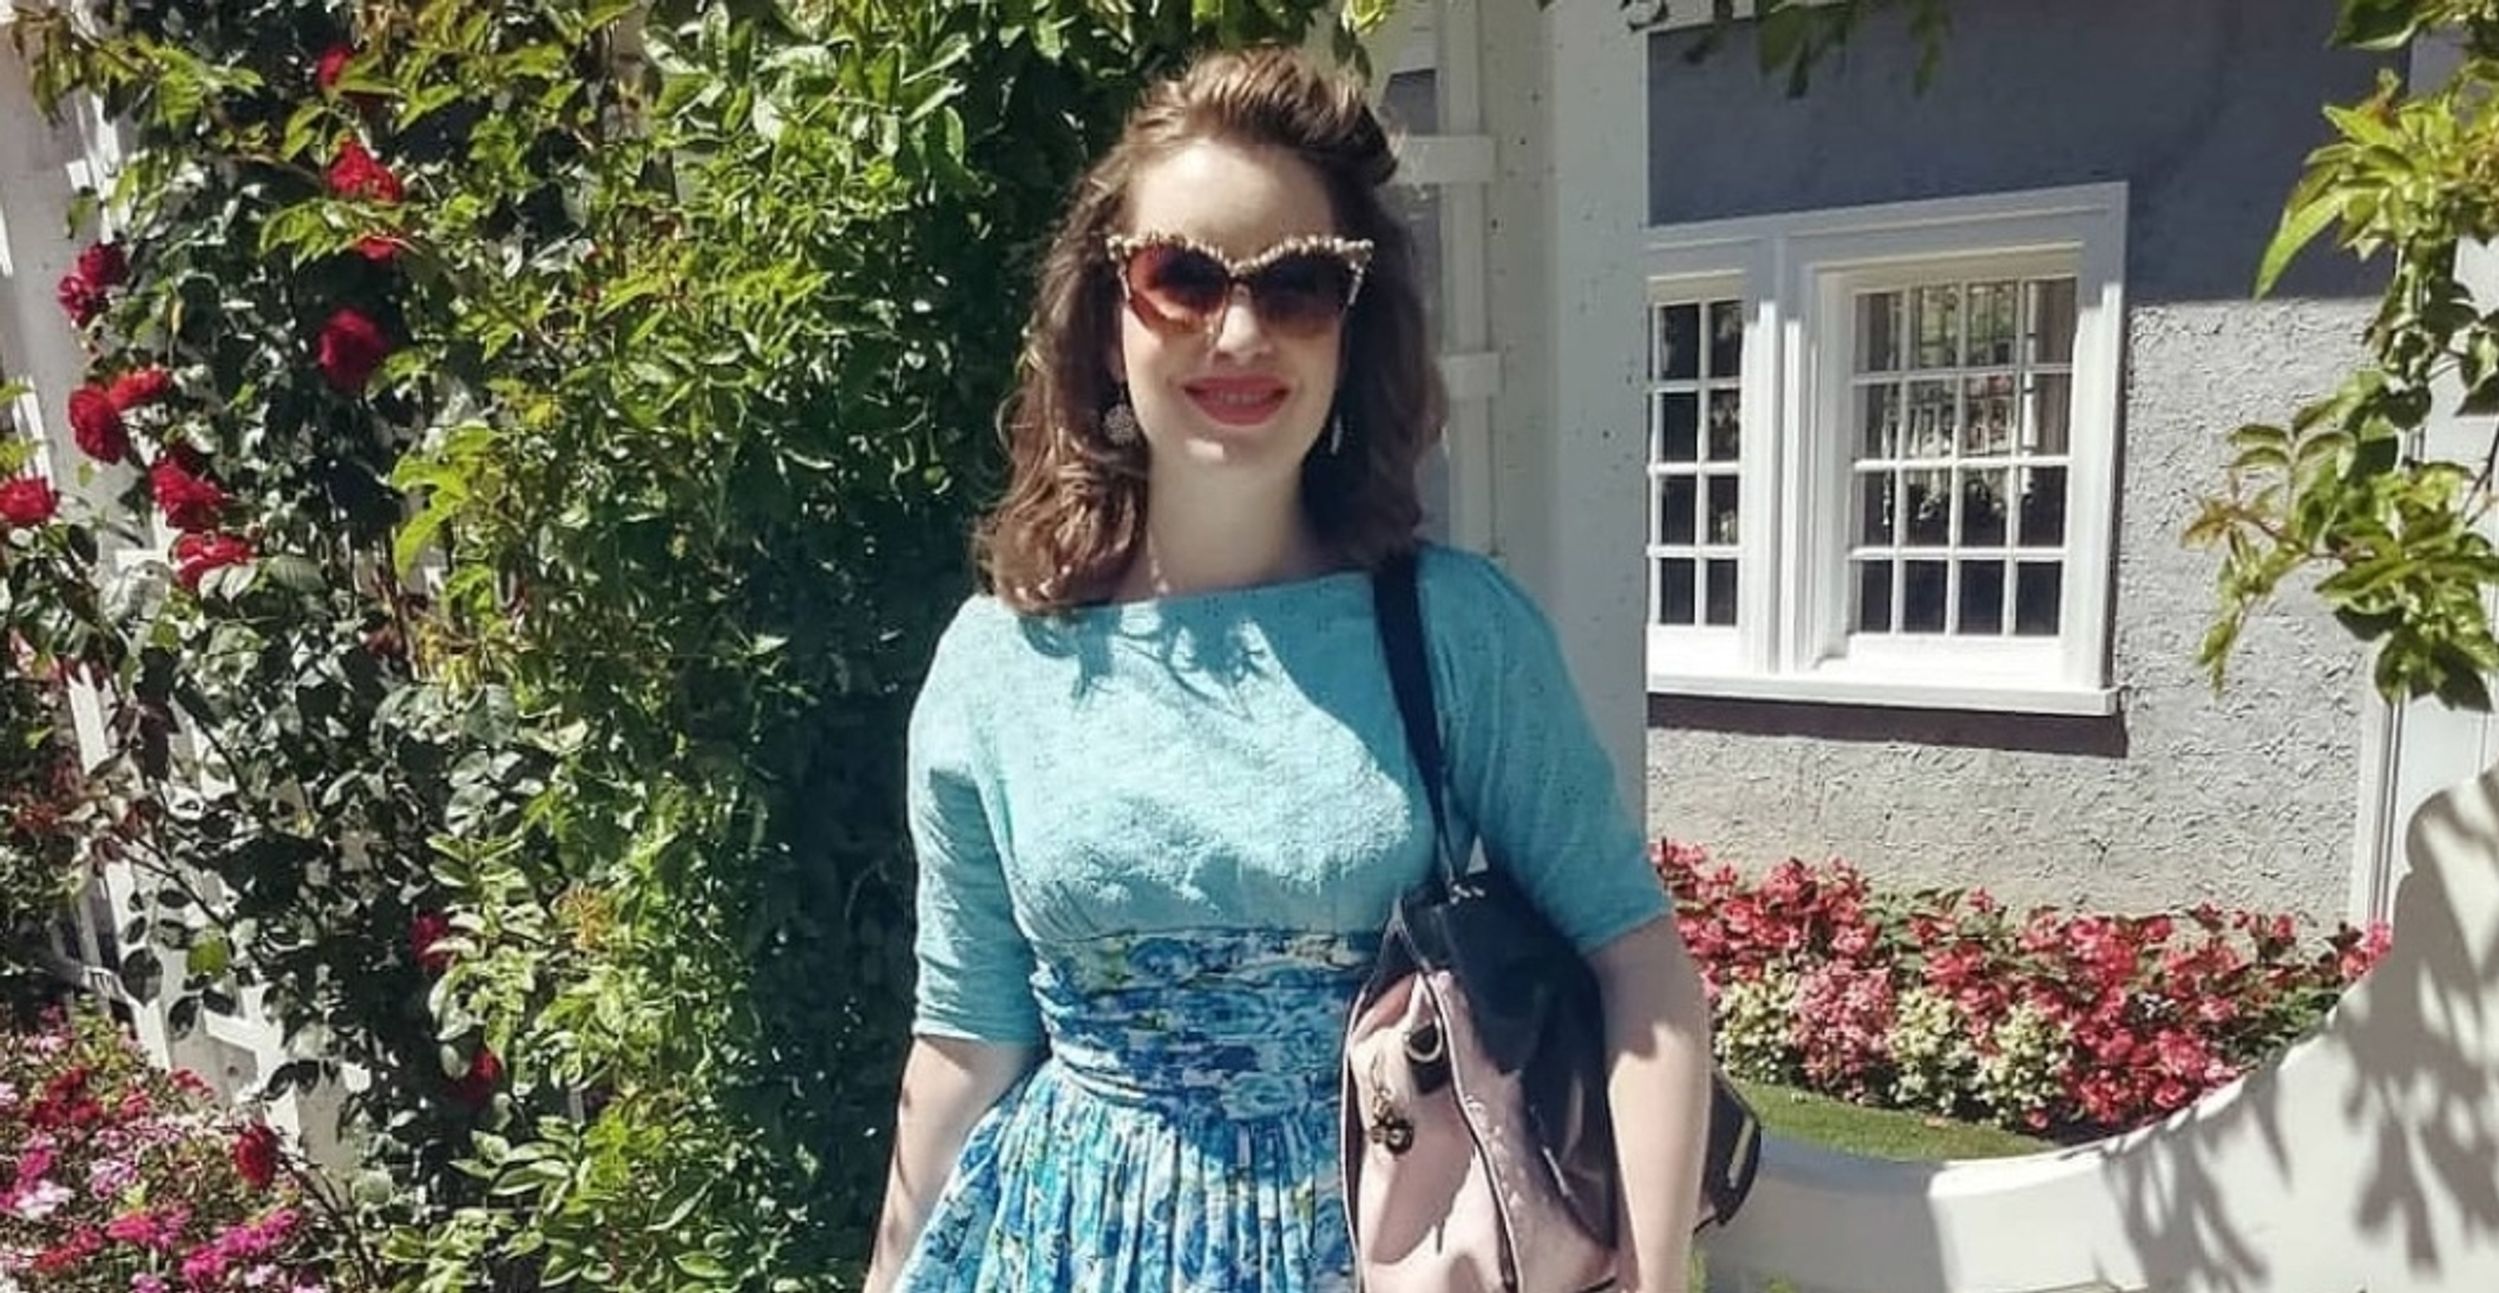 Woman Ditches Office Job To Pursue Dream Of Being A 1950s-Era Housewife